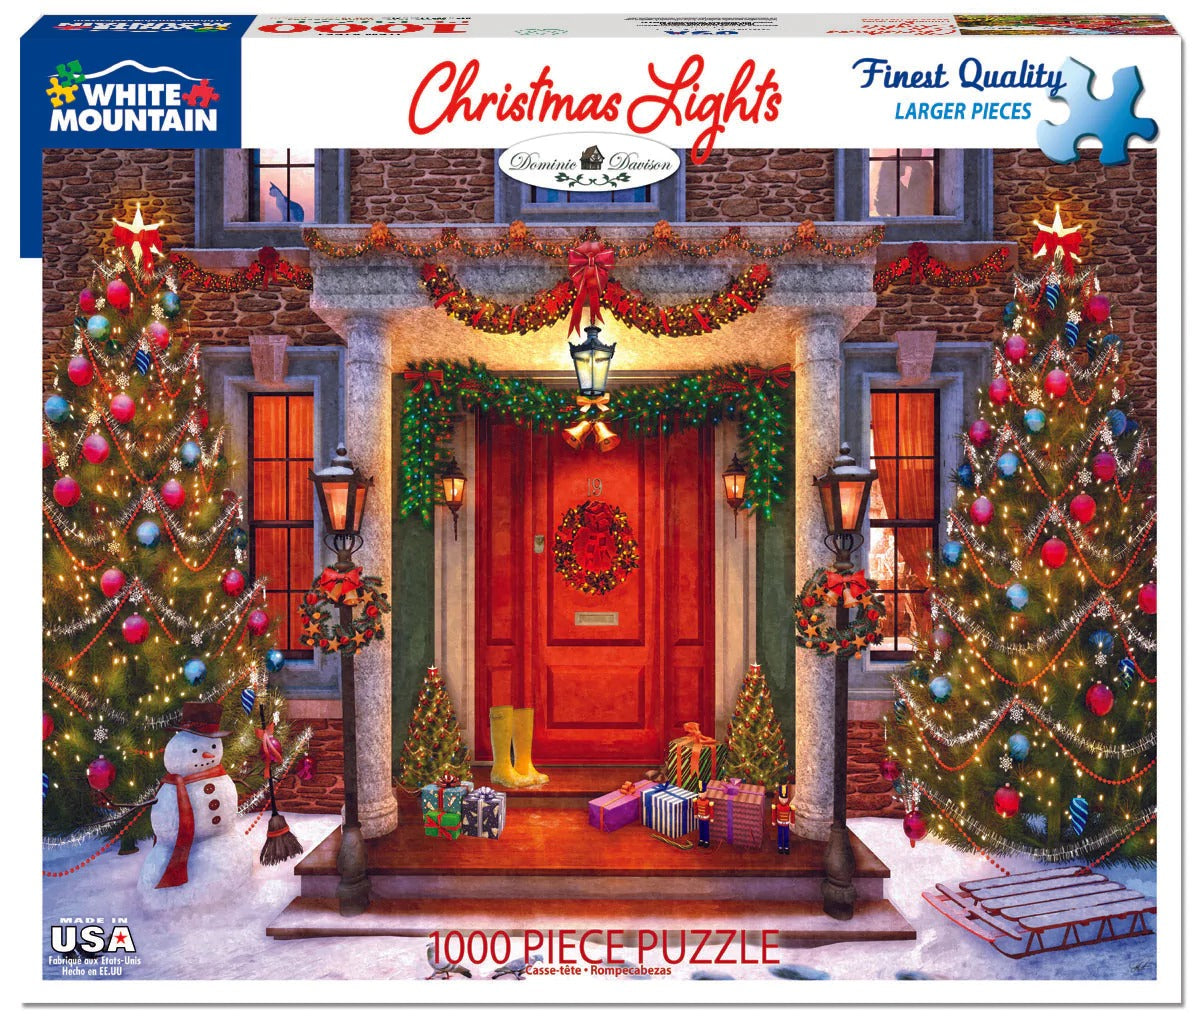 Christmas Lights 1000 Piece Jigsaw Puzzle by White Mountain